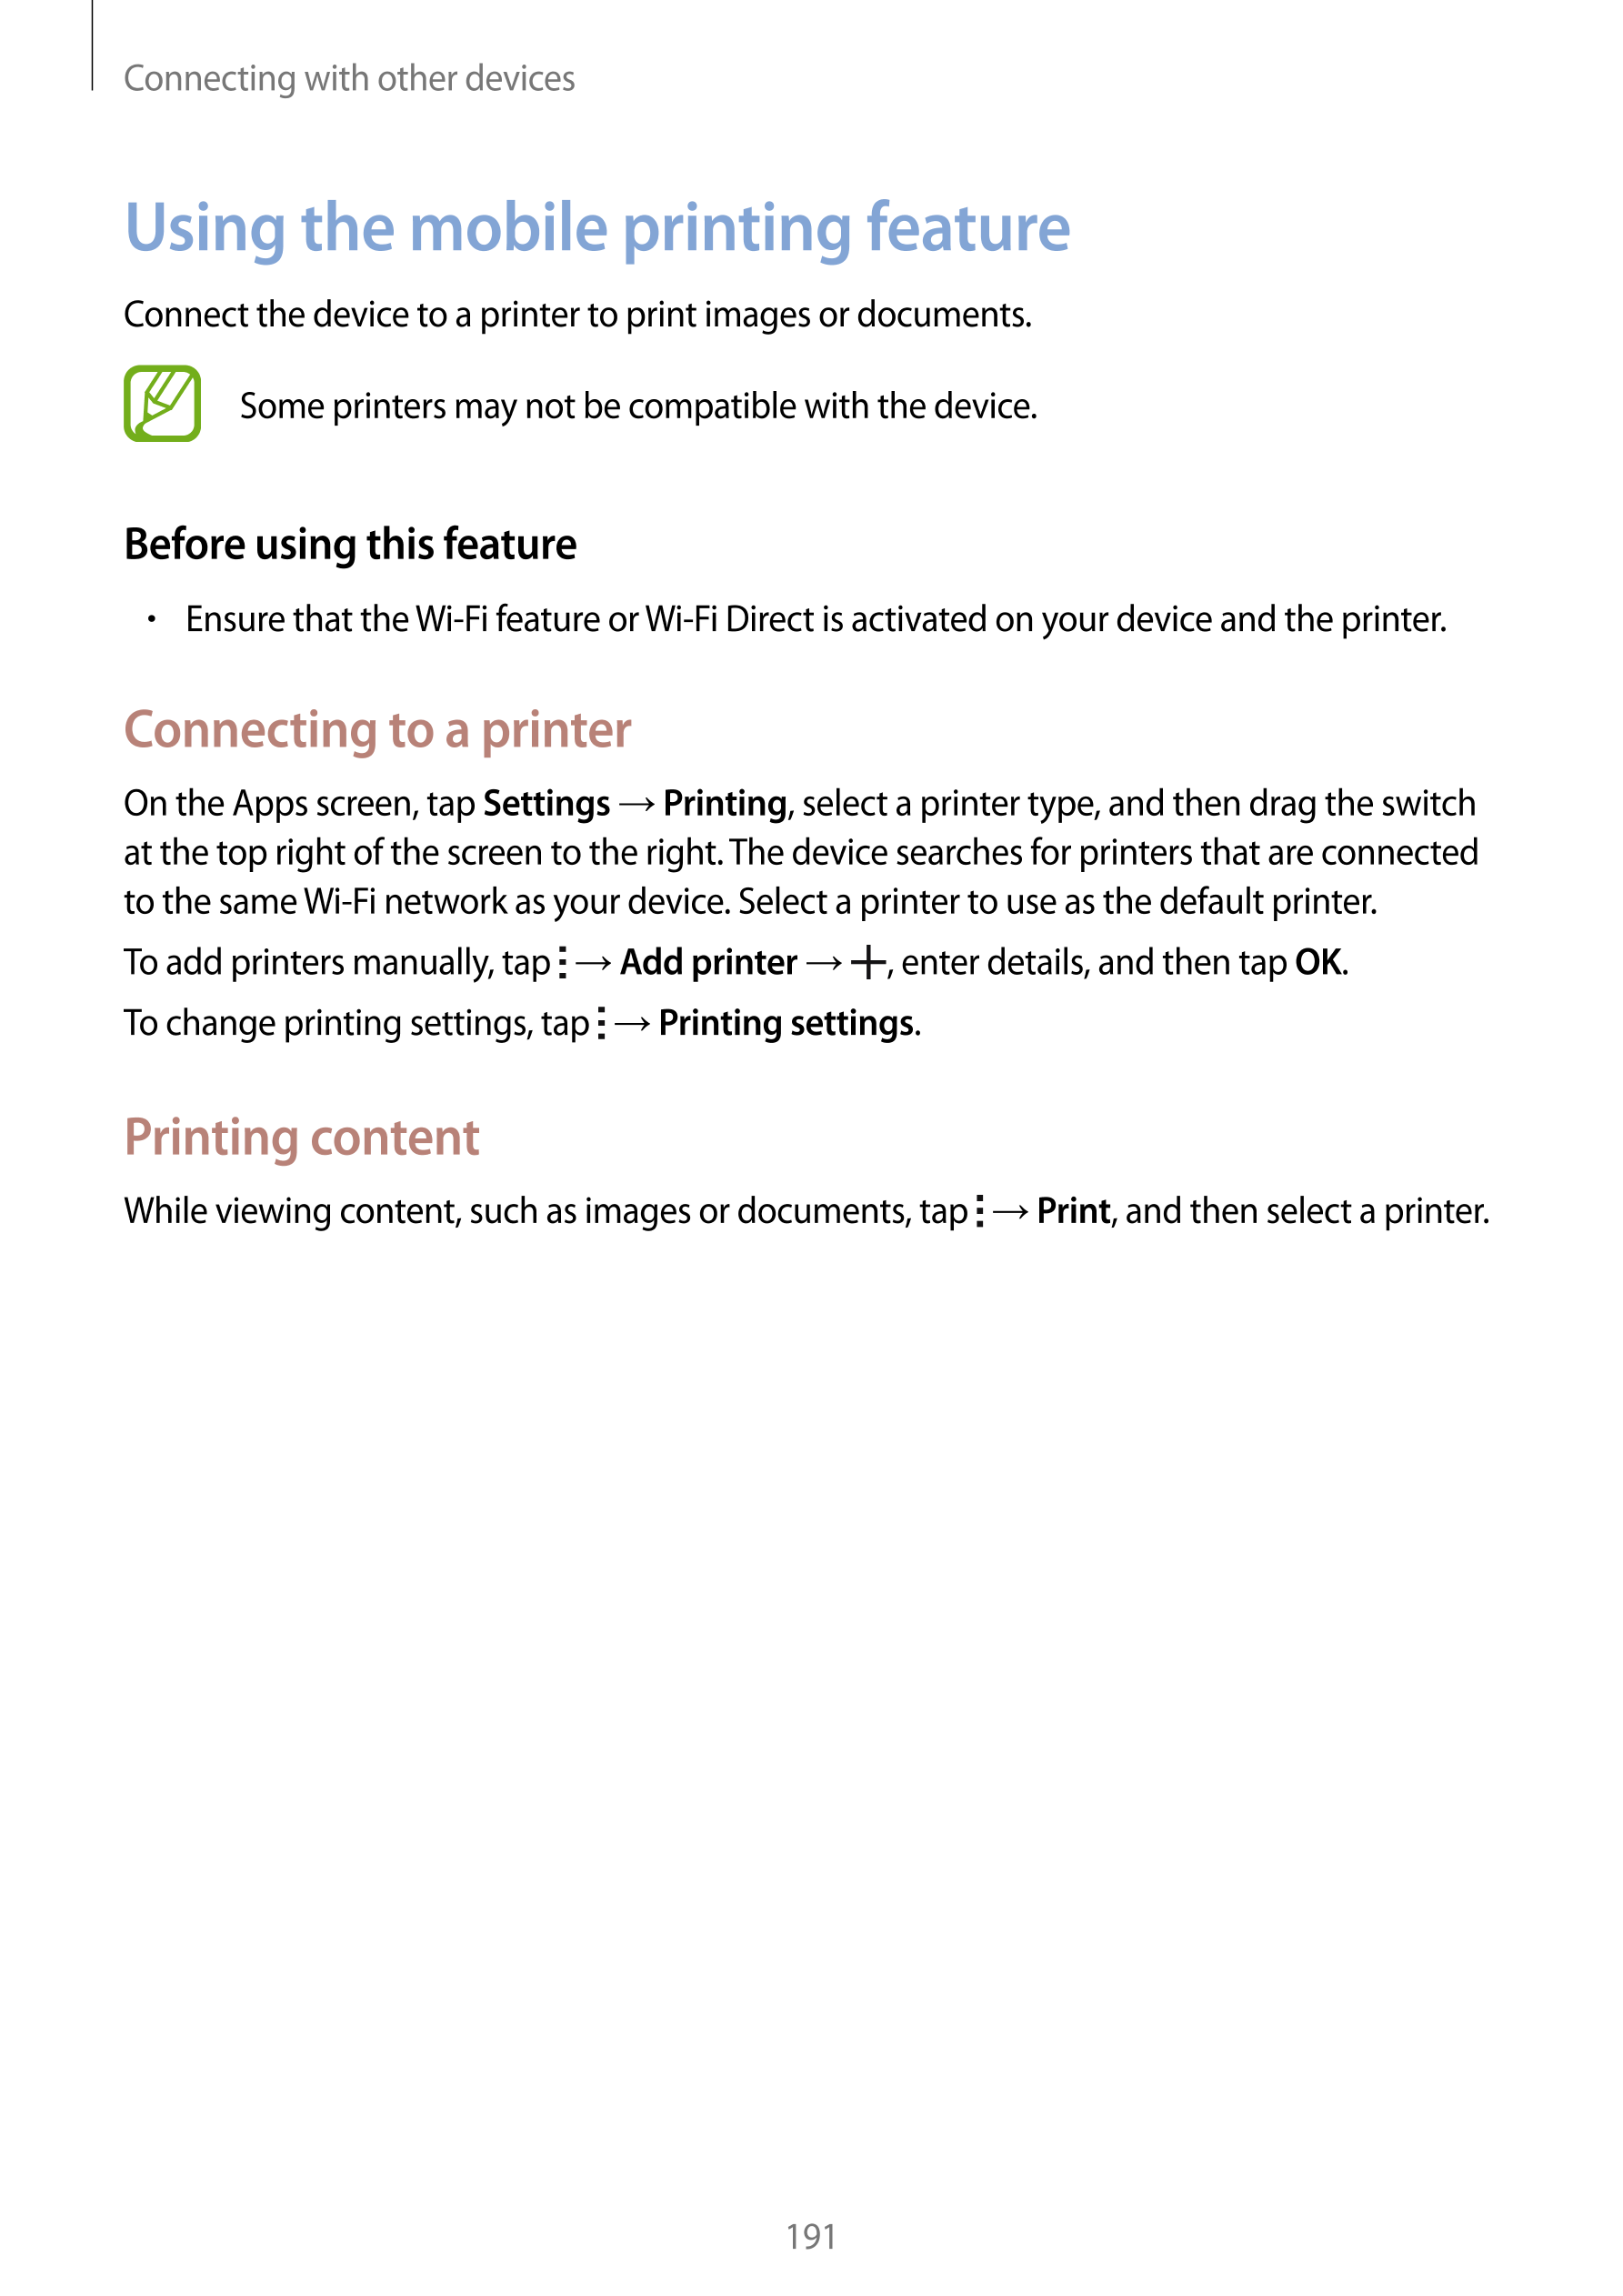 Connecting with other devices
Using the mobile printing feature
Connect the device to a printer to print images or documents.
So